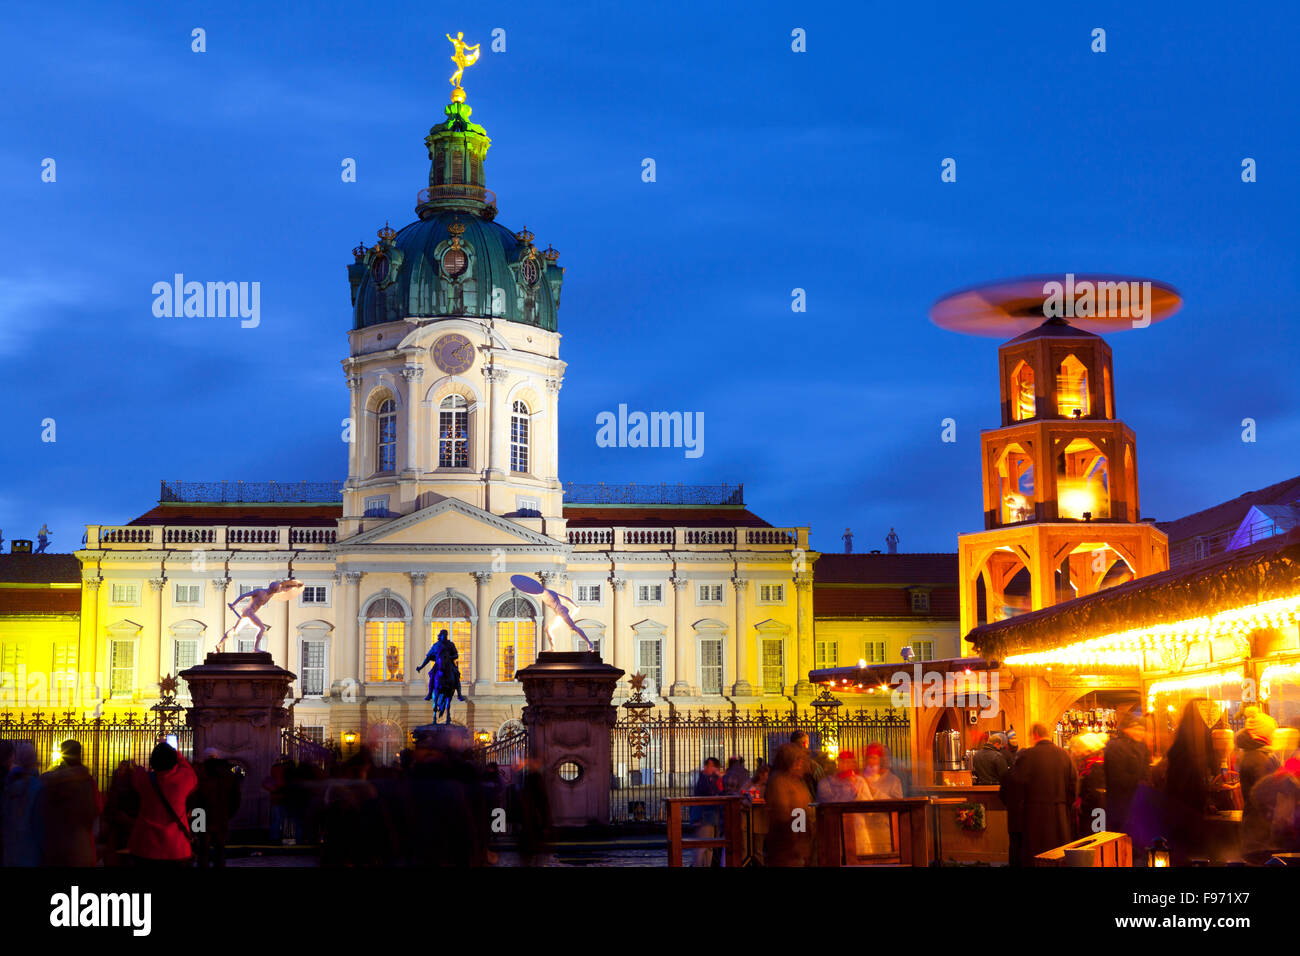 Christmas Market in front of Charlottenburg Palace, Berlin, Germany Stock Photo